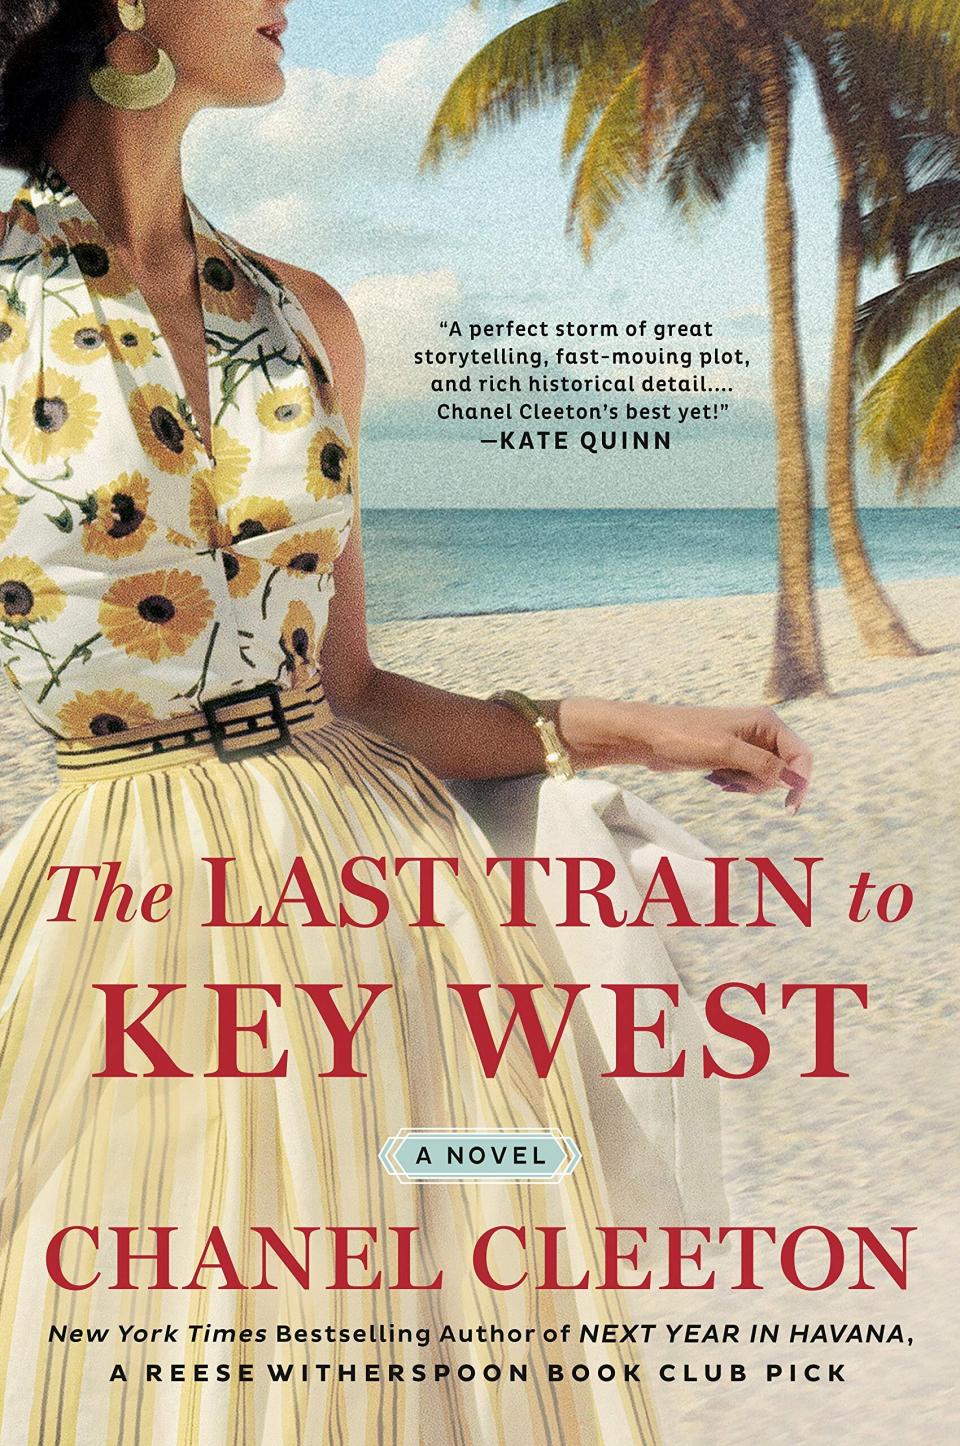 Three women find themselves heading to the Florida Keys for Labor Day weekend in 1935. While they&rsquo;re each there for different reasons &mdash; for the honeymoon of an arranged marriage, to regain wealth lost in the Wall Street crash &mdash; their paths cross in unexpected ways. Chanel Cleeton&rsquo;s historical fiction novel takes place just days before the infamous 1935 Labor Day Hurricane sweeps through the area. Read more about it on <a href="https://www.goodreads.com/book/show/52910908-the-last-train-to-key-west" target="_blank" rel="noopener noreferrer">Goodreads</a>, and grab a copy on <a href="https://amzn.to/2XQSqM3" target="_blank" rel="noopener noreferrer">Amazon</a>. <br /><br /><i>Expected release date: June 16</i>